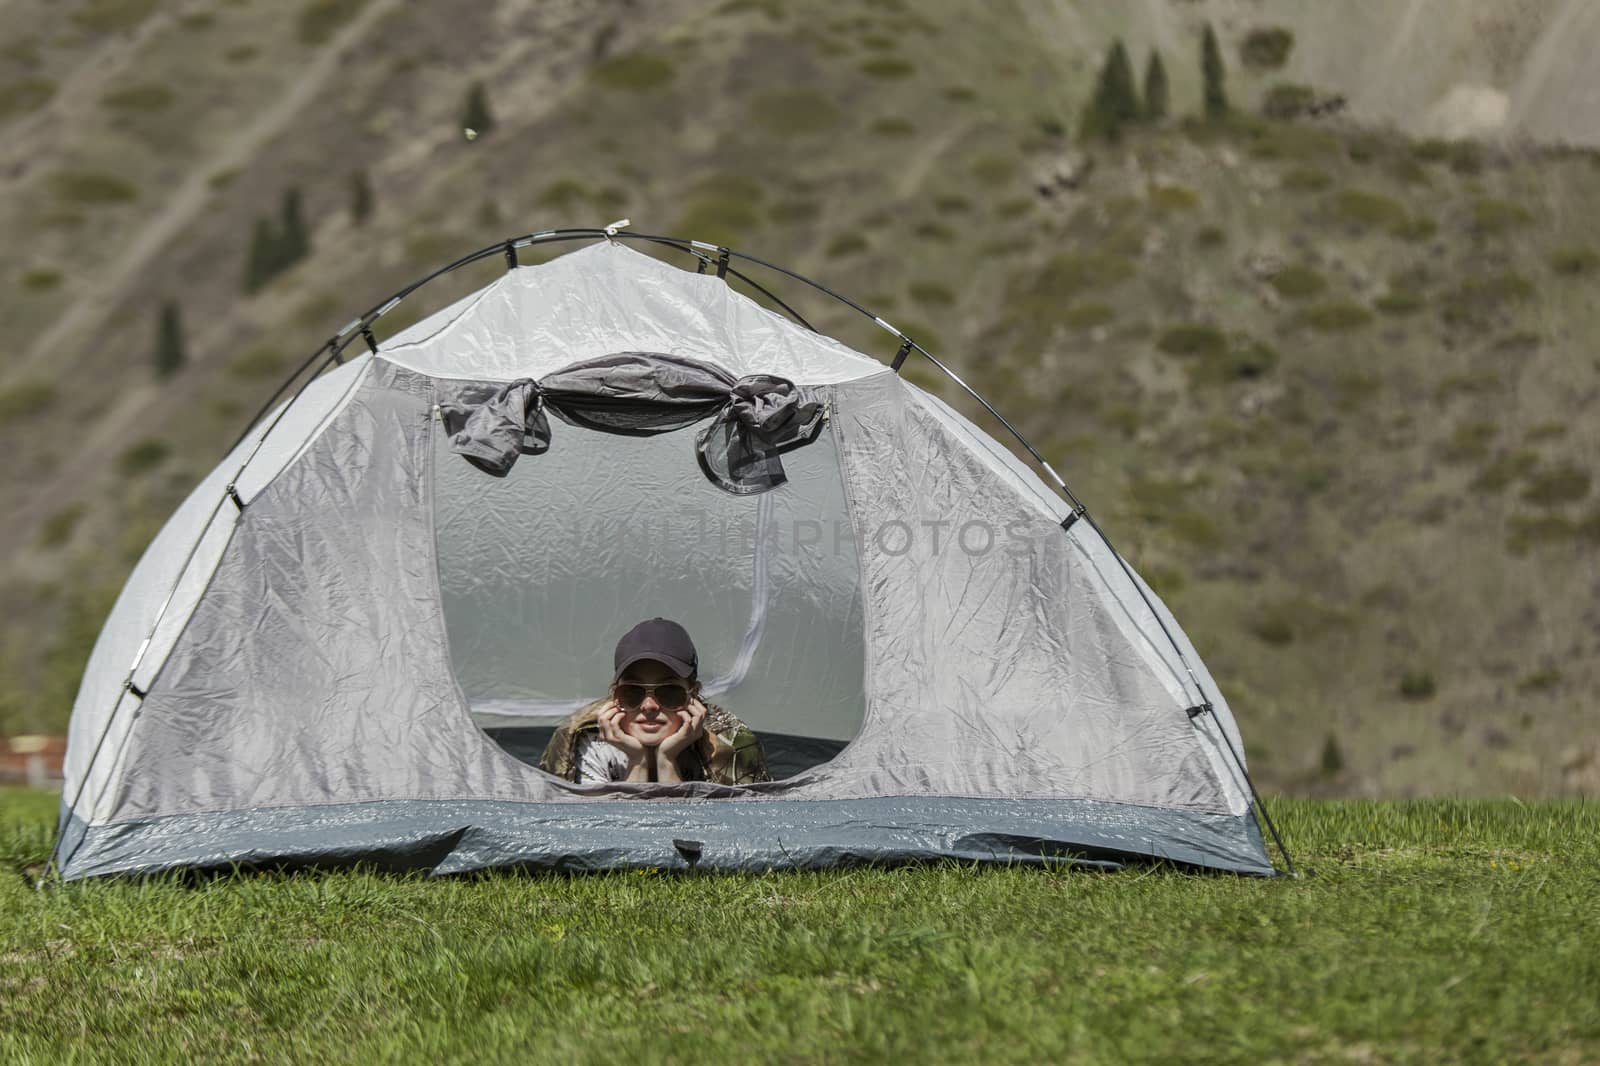 Rest in tent by snep_photo